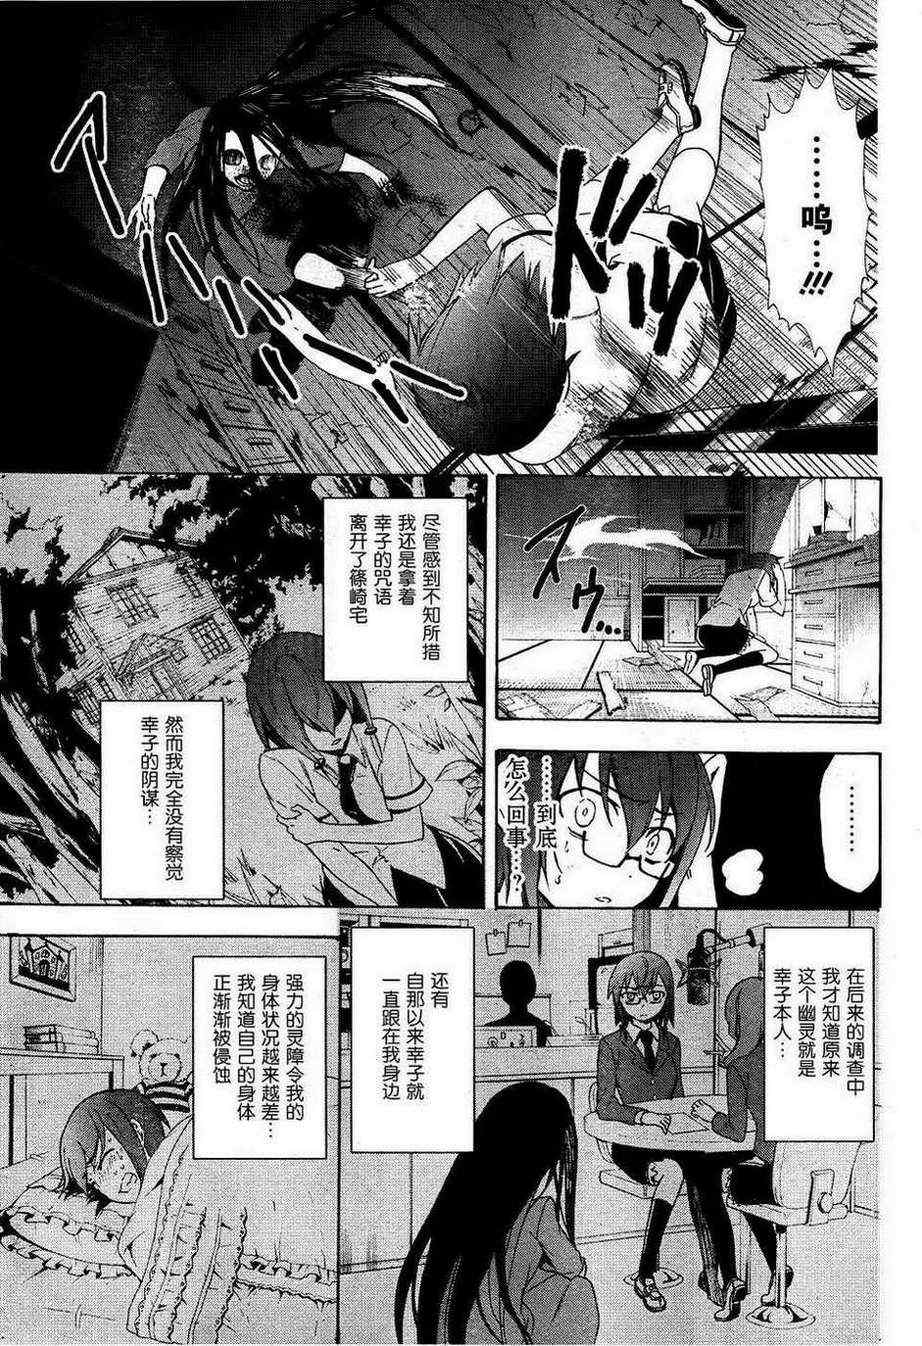 BLOOD_COVERED - 第38話 - 1